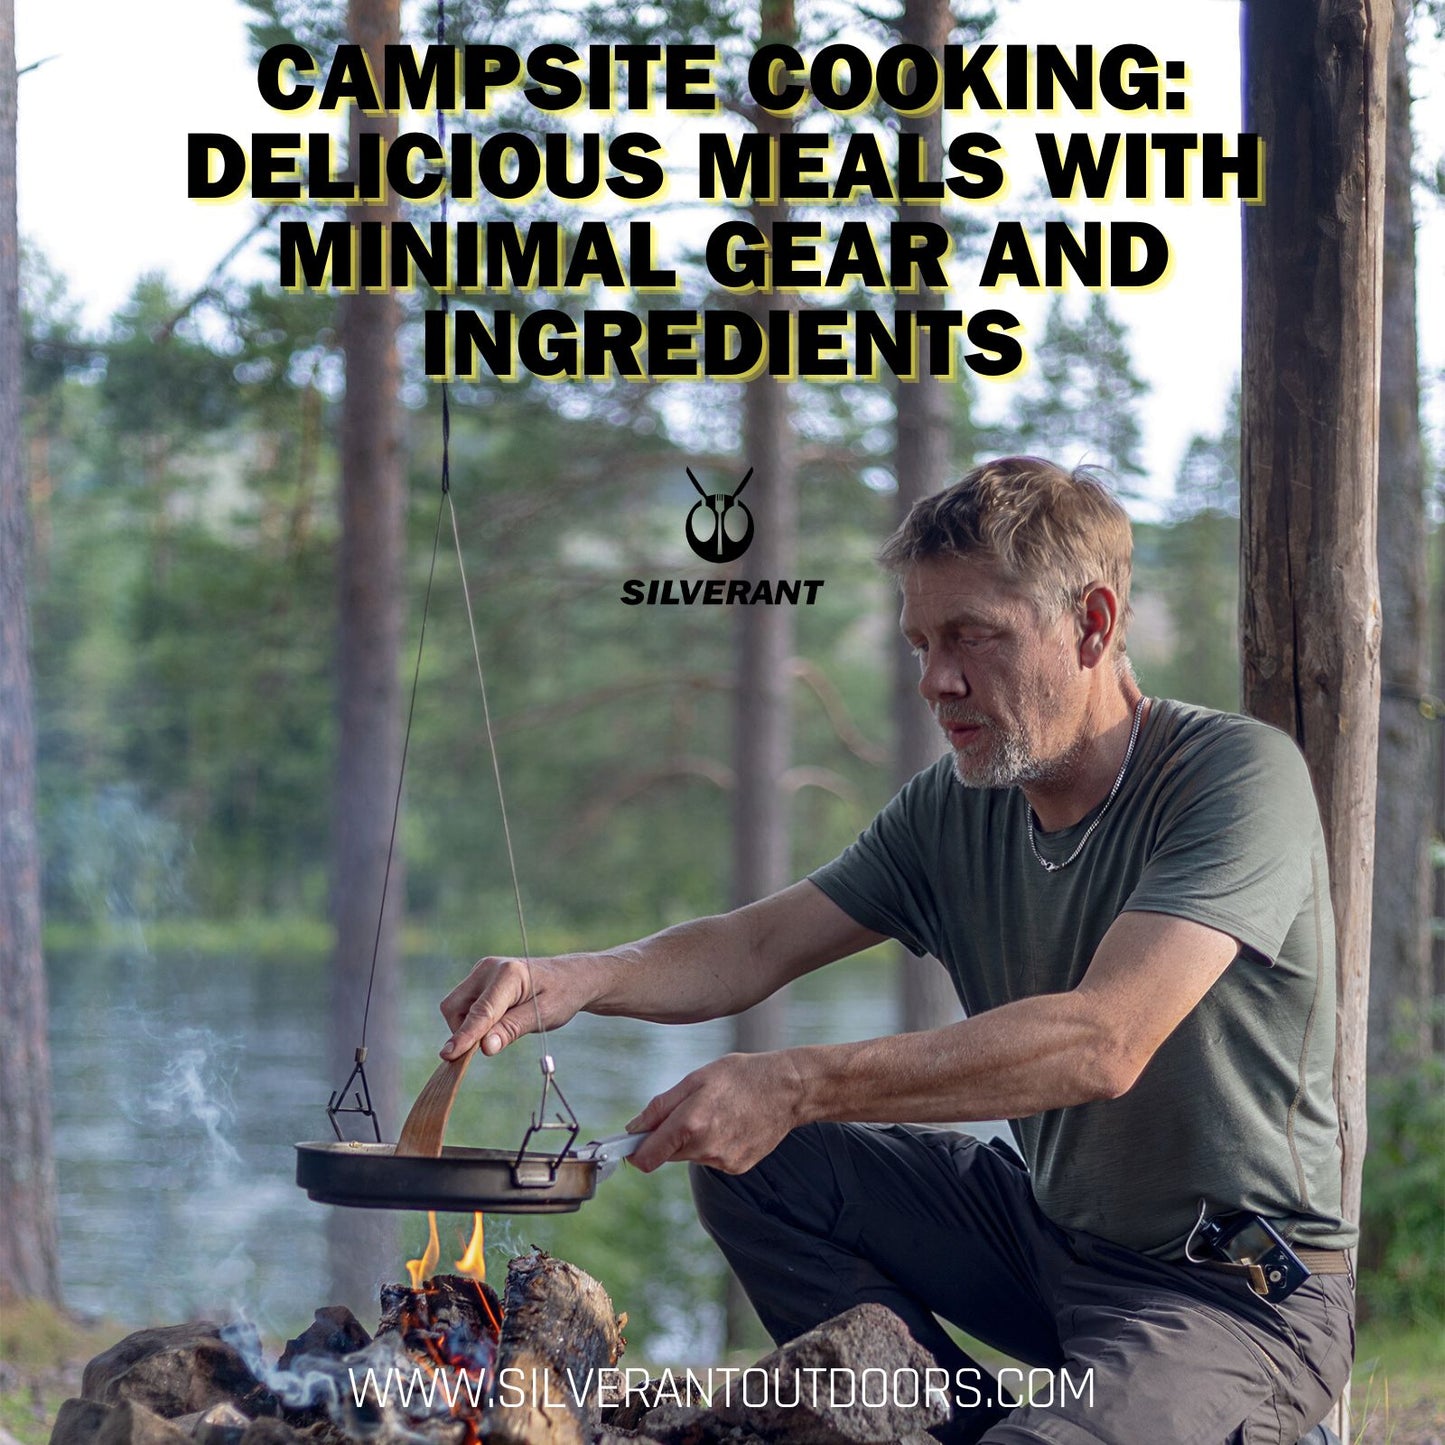 Campsite Cooking: Delicious Meals with Minimal Gear and Ingredients